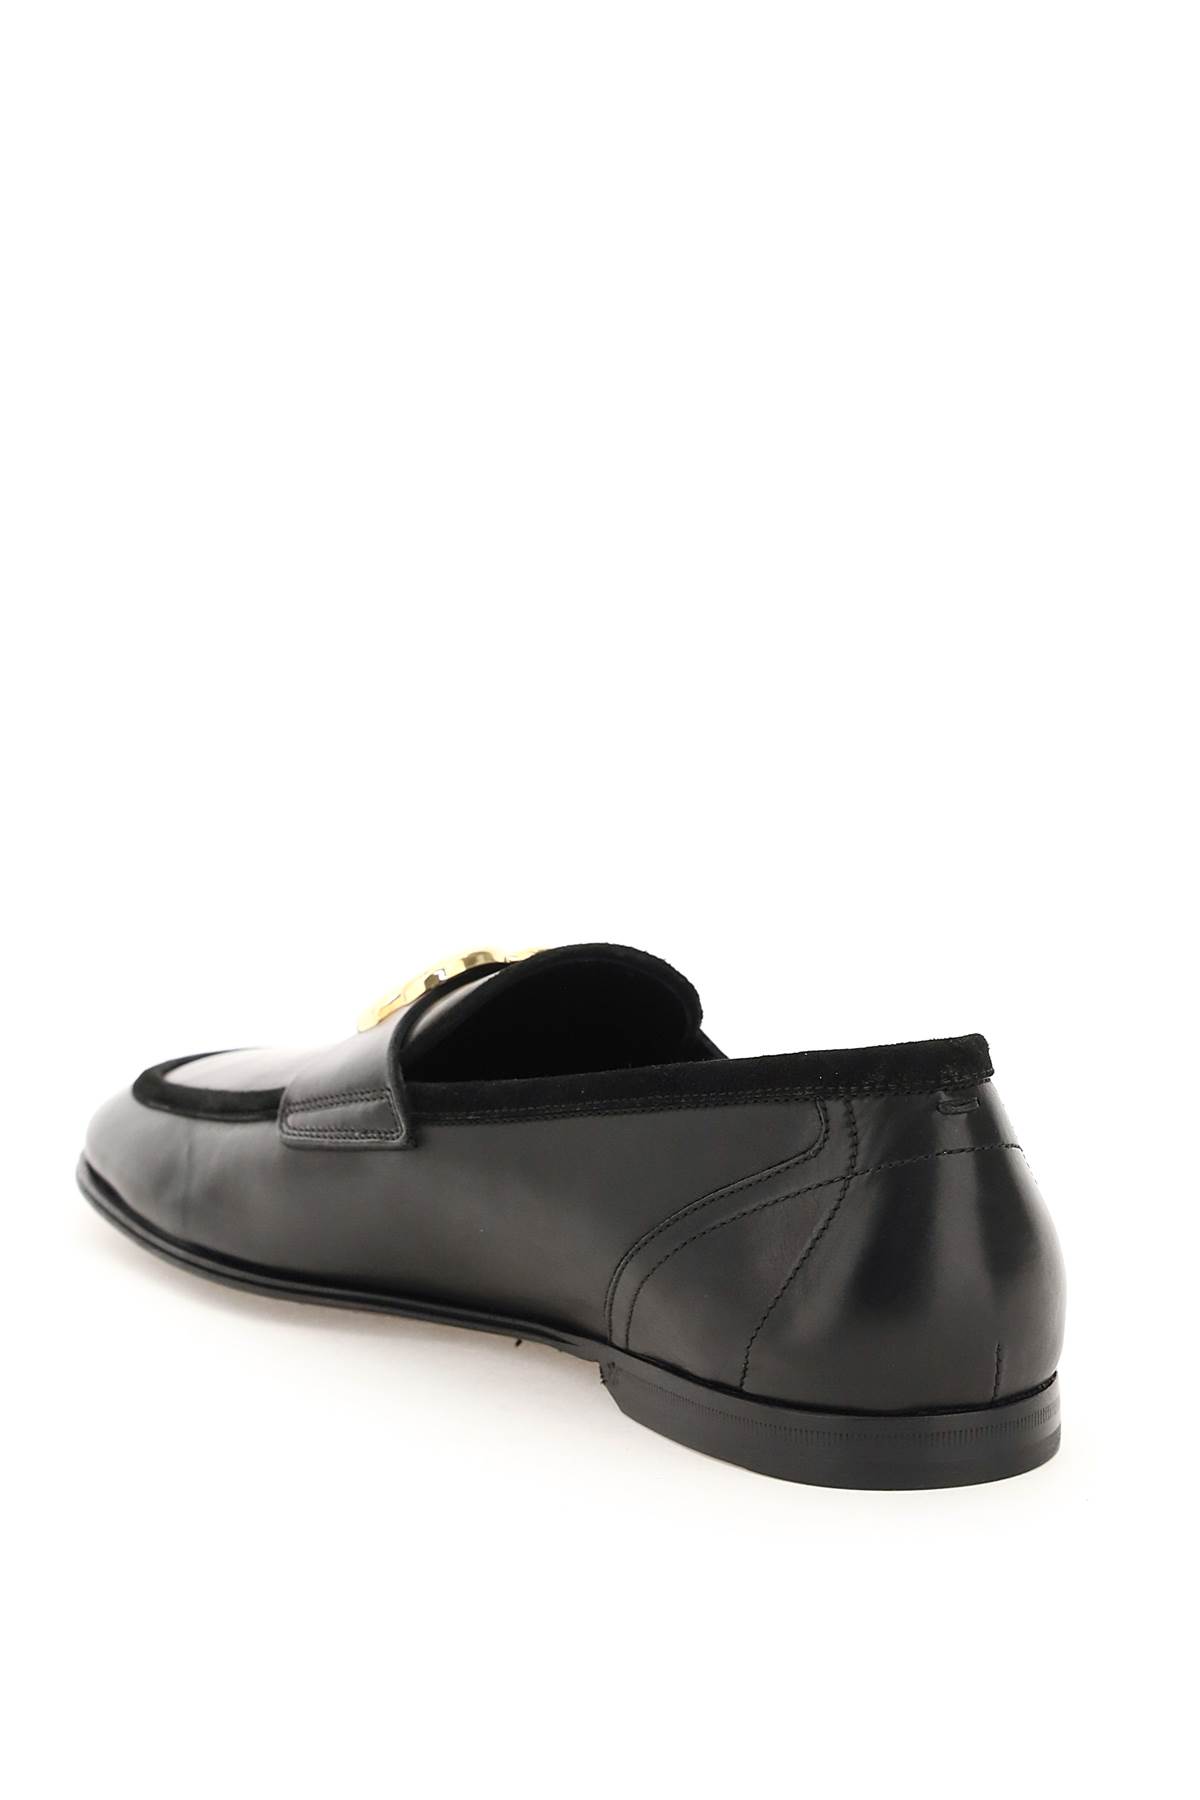 Shop Dolce & Gabbana Leather Ariosto Slippers Loafers In Nero